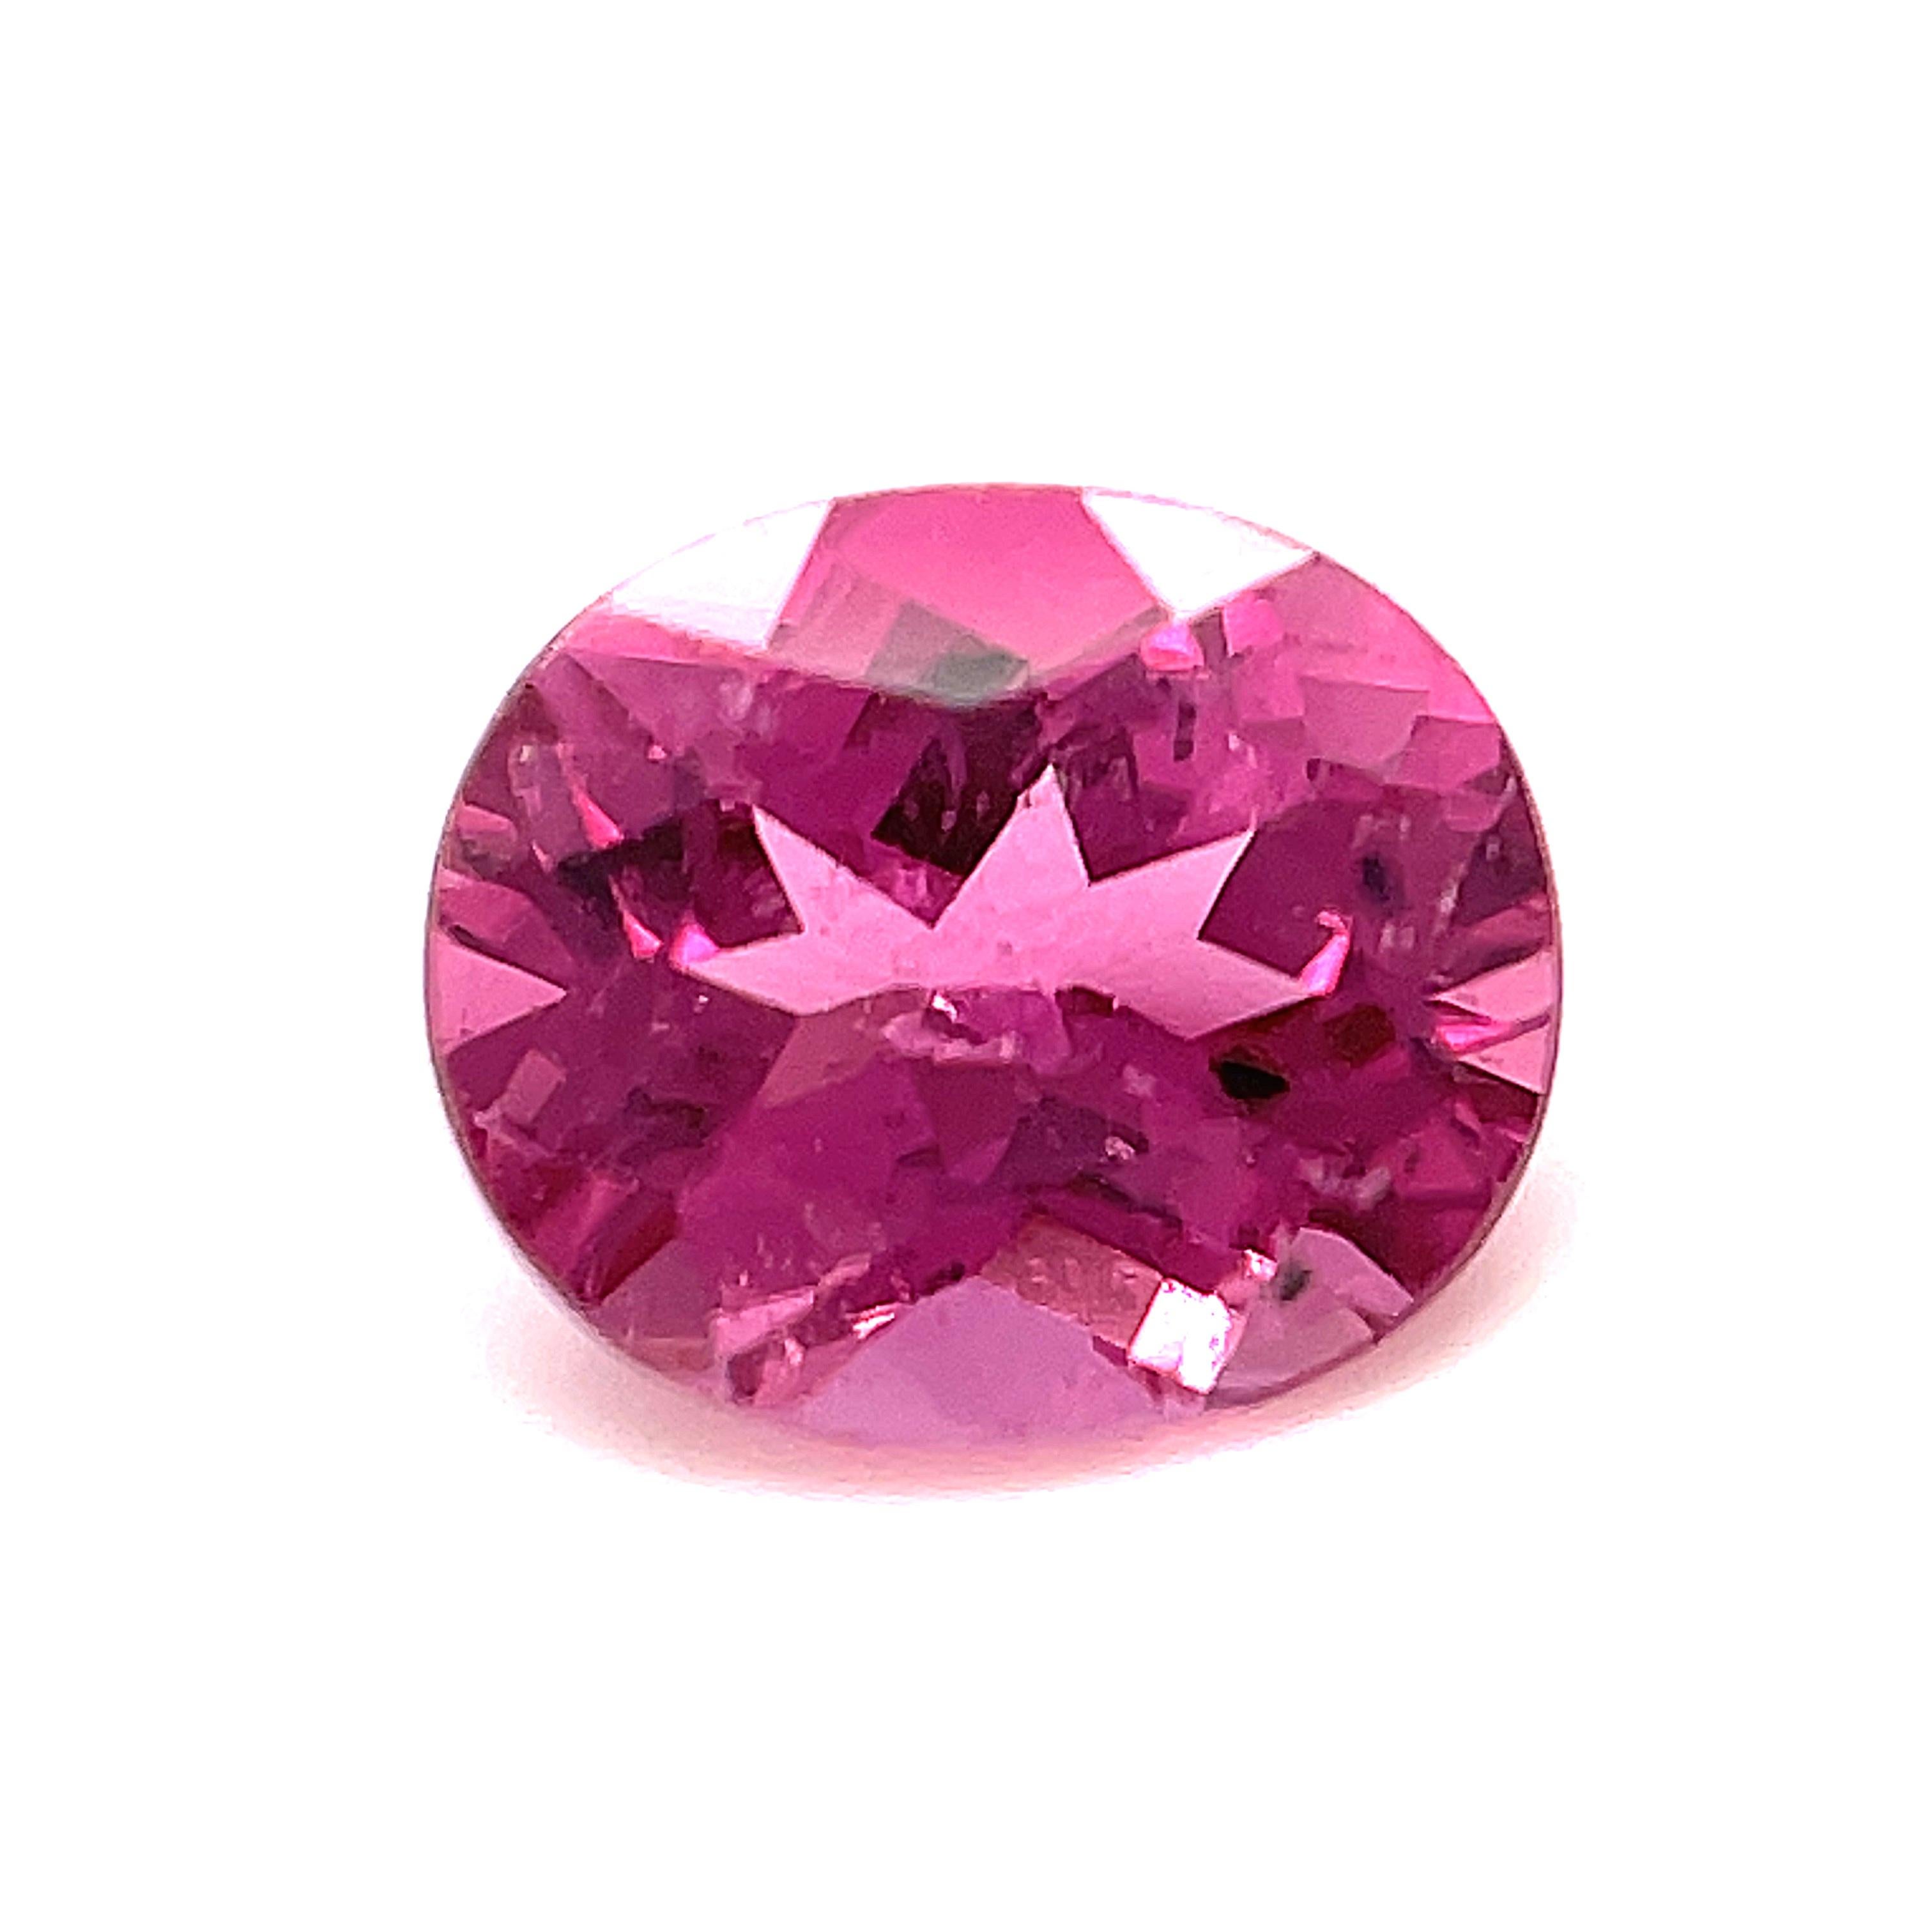 This 1.02 carat oval pink tourmaline is sure to put a smile on your face! With its slightly purplish pink hue and pleasing shape, this sparkling gemstone would make a very pretty ring or pendant for the special someone in your life! Measuring 6.93 x